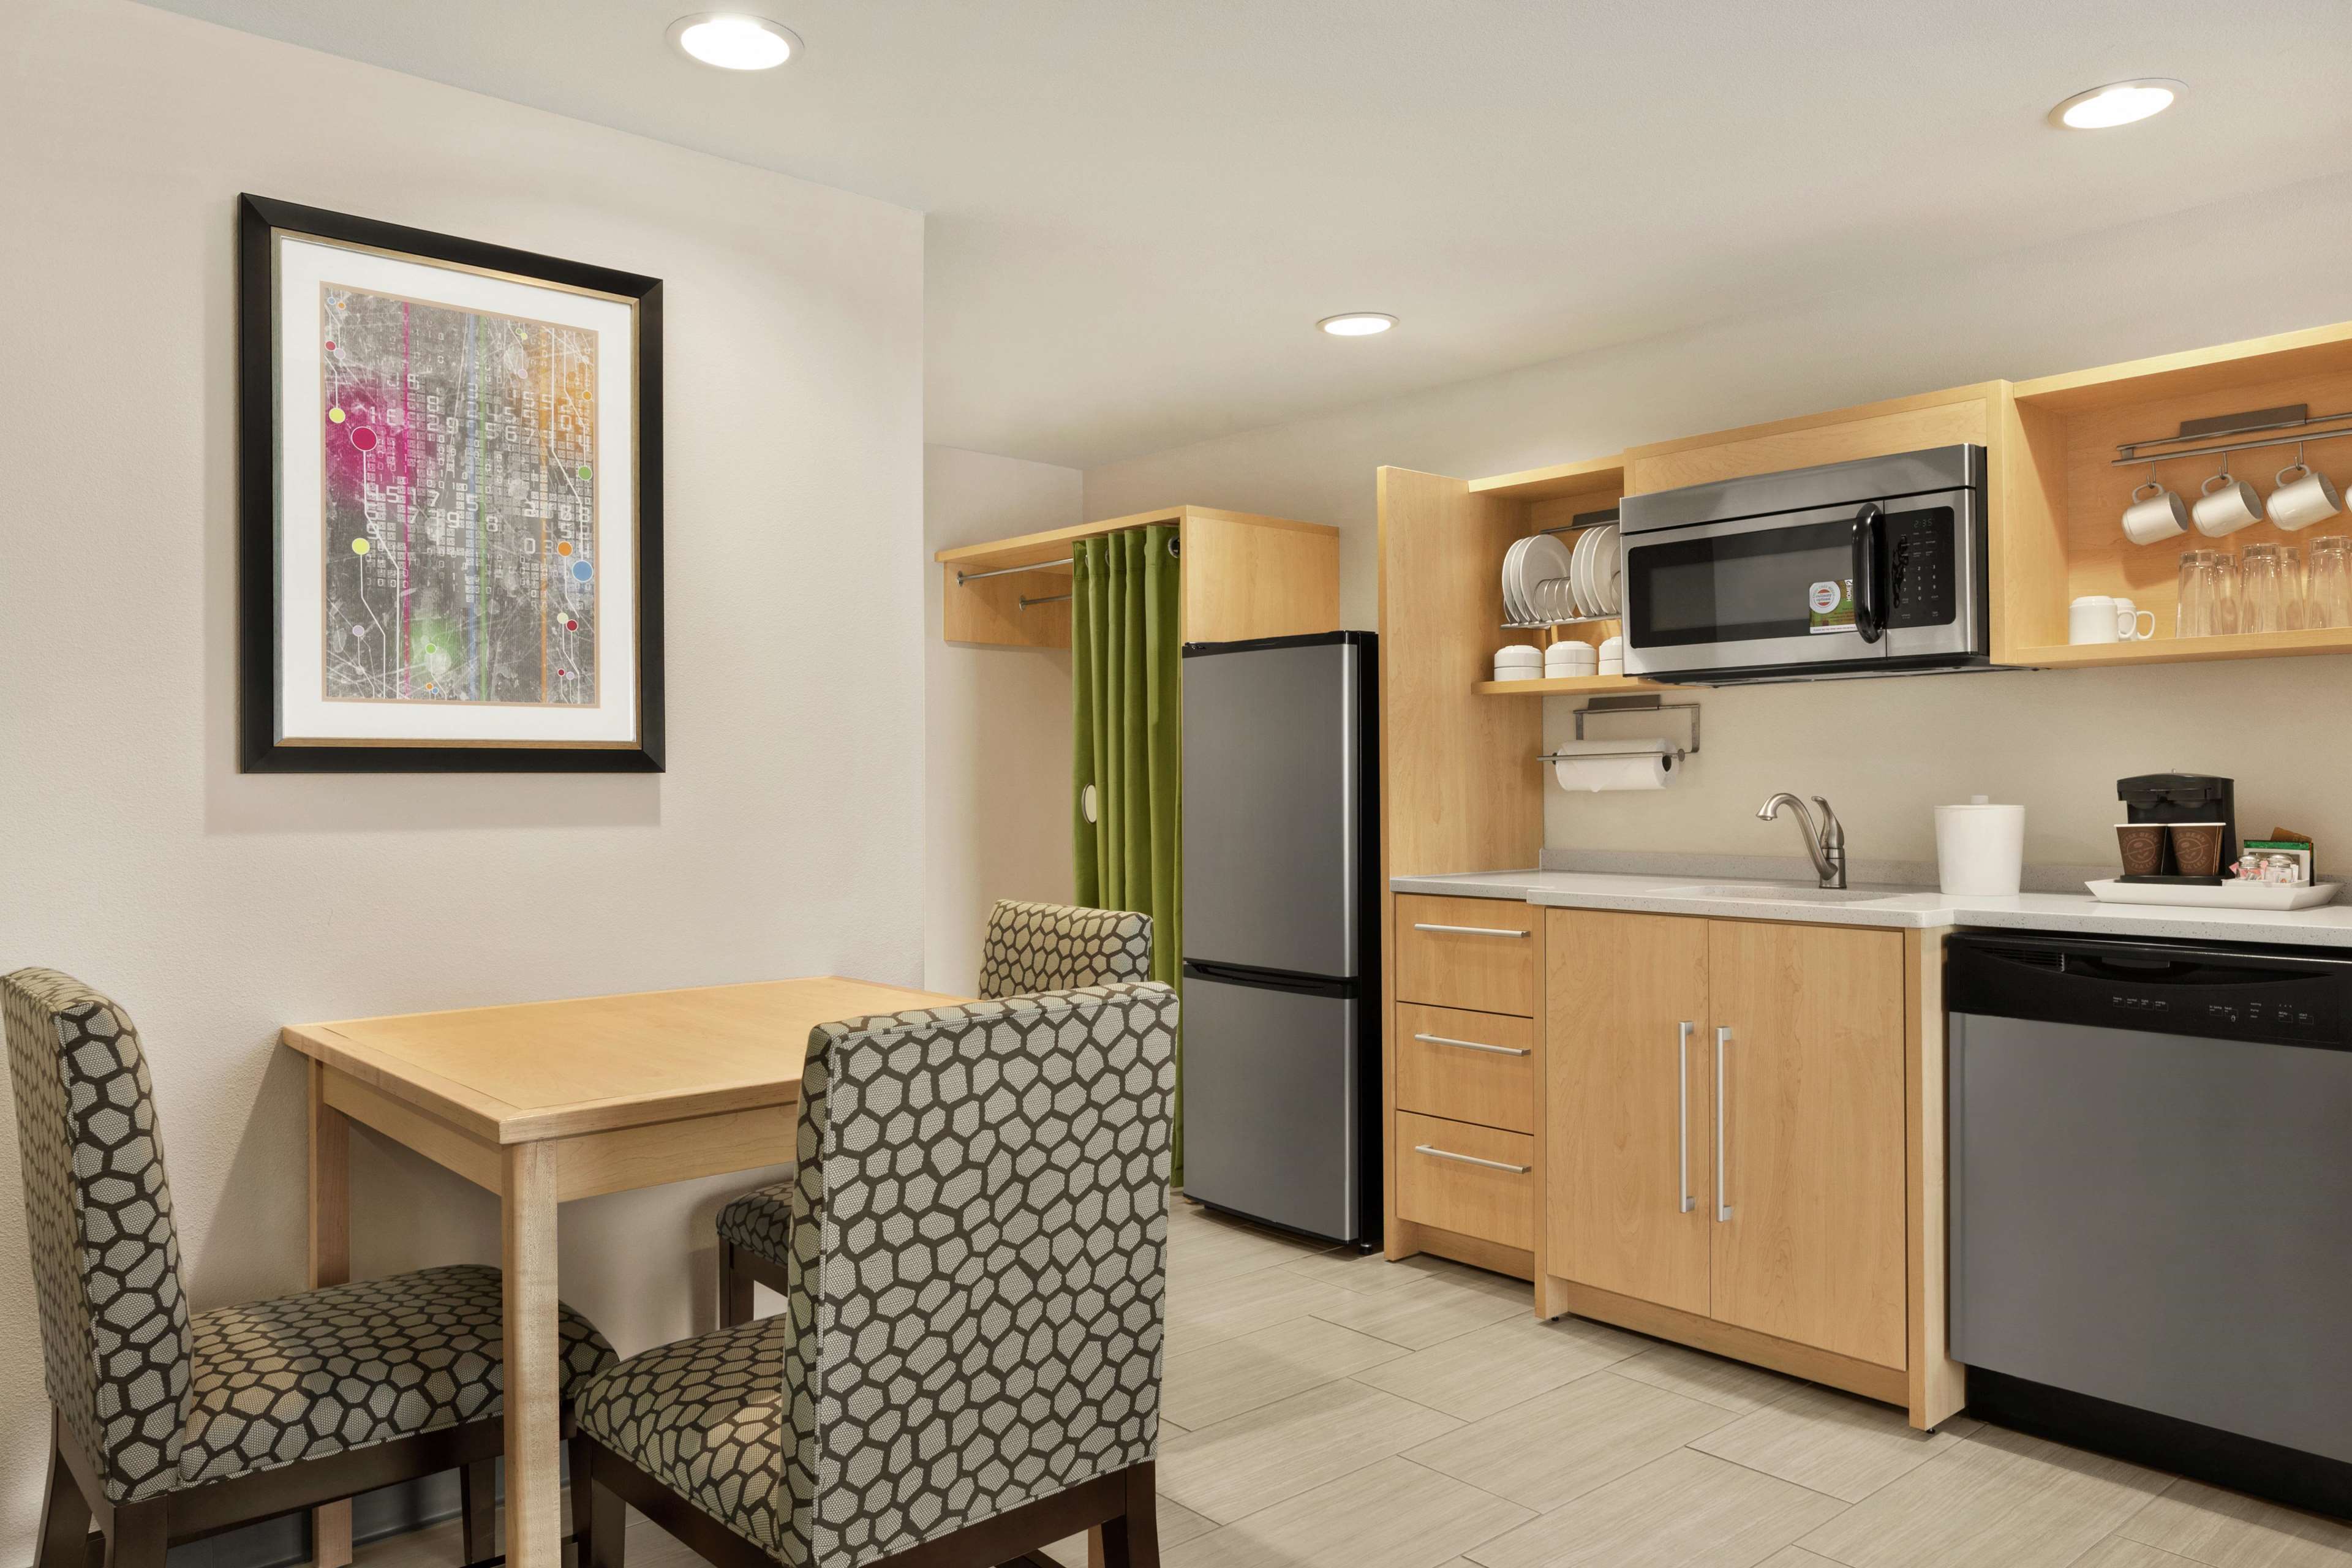 Home2 Suites by Hilton Austin North/Near the Domain Photo